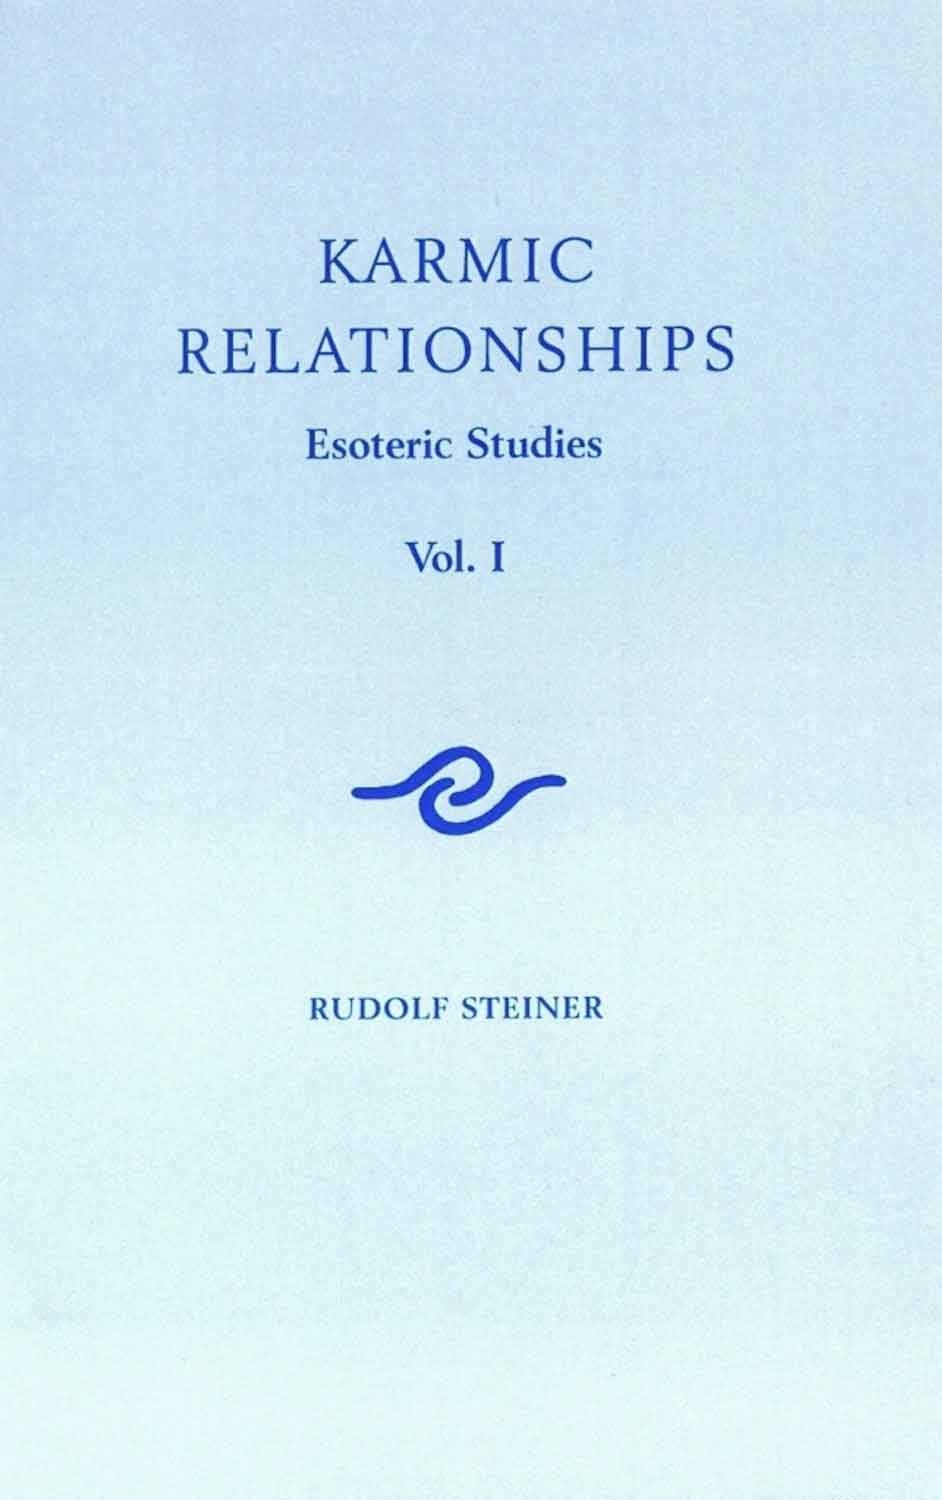 Episode 53: Lecture 53: Karmic Relationships given on July 6 1924 by Rudolf Steiner